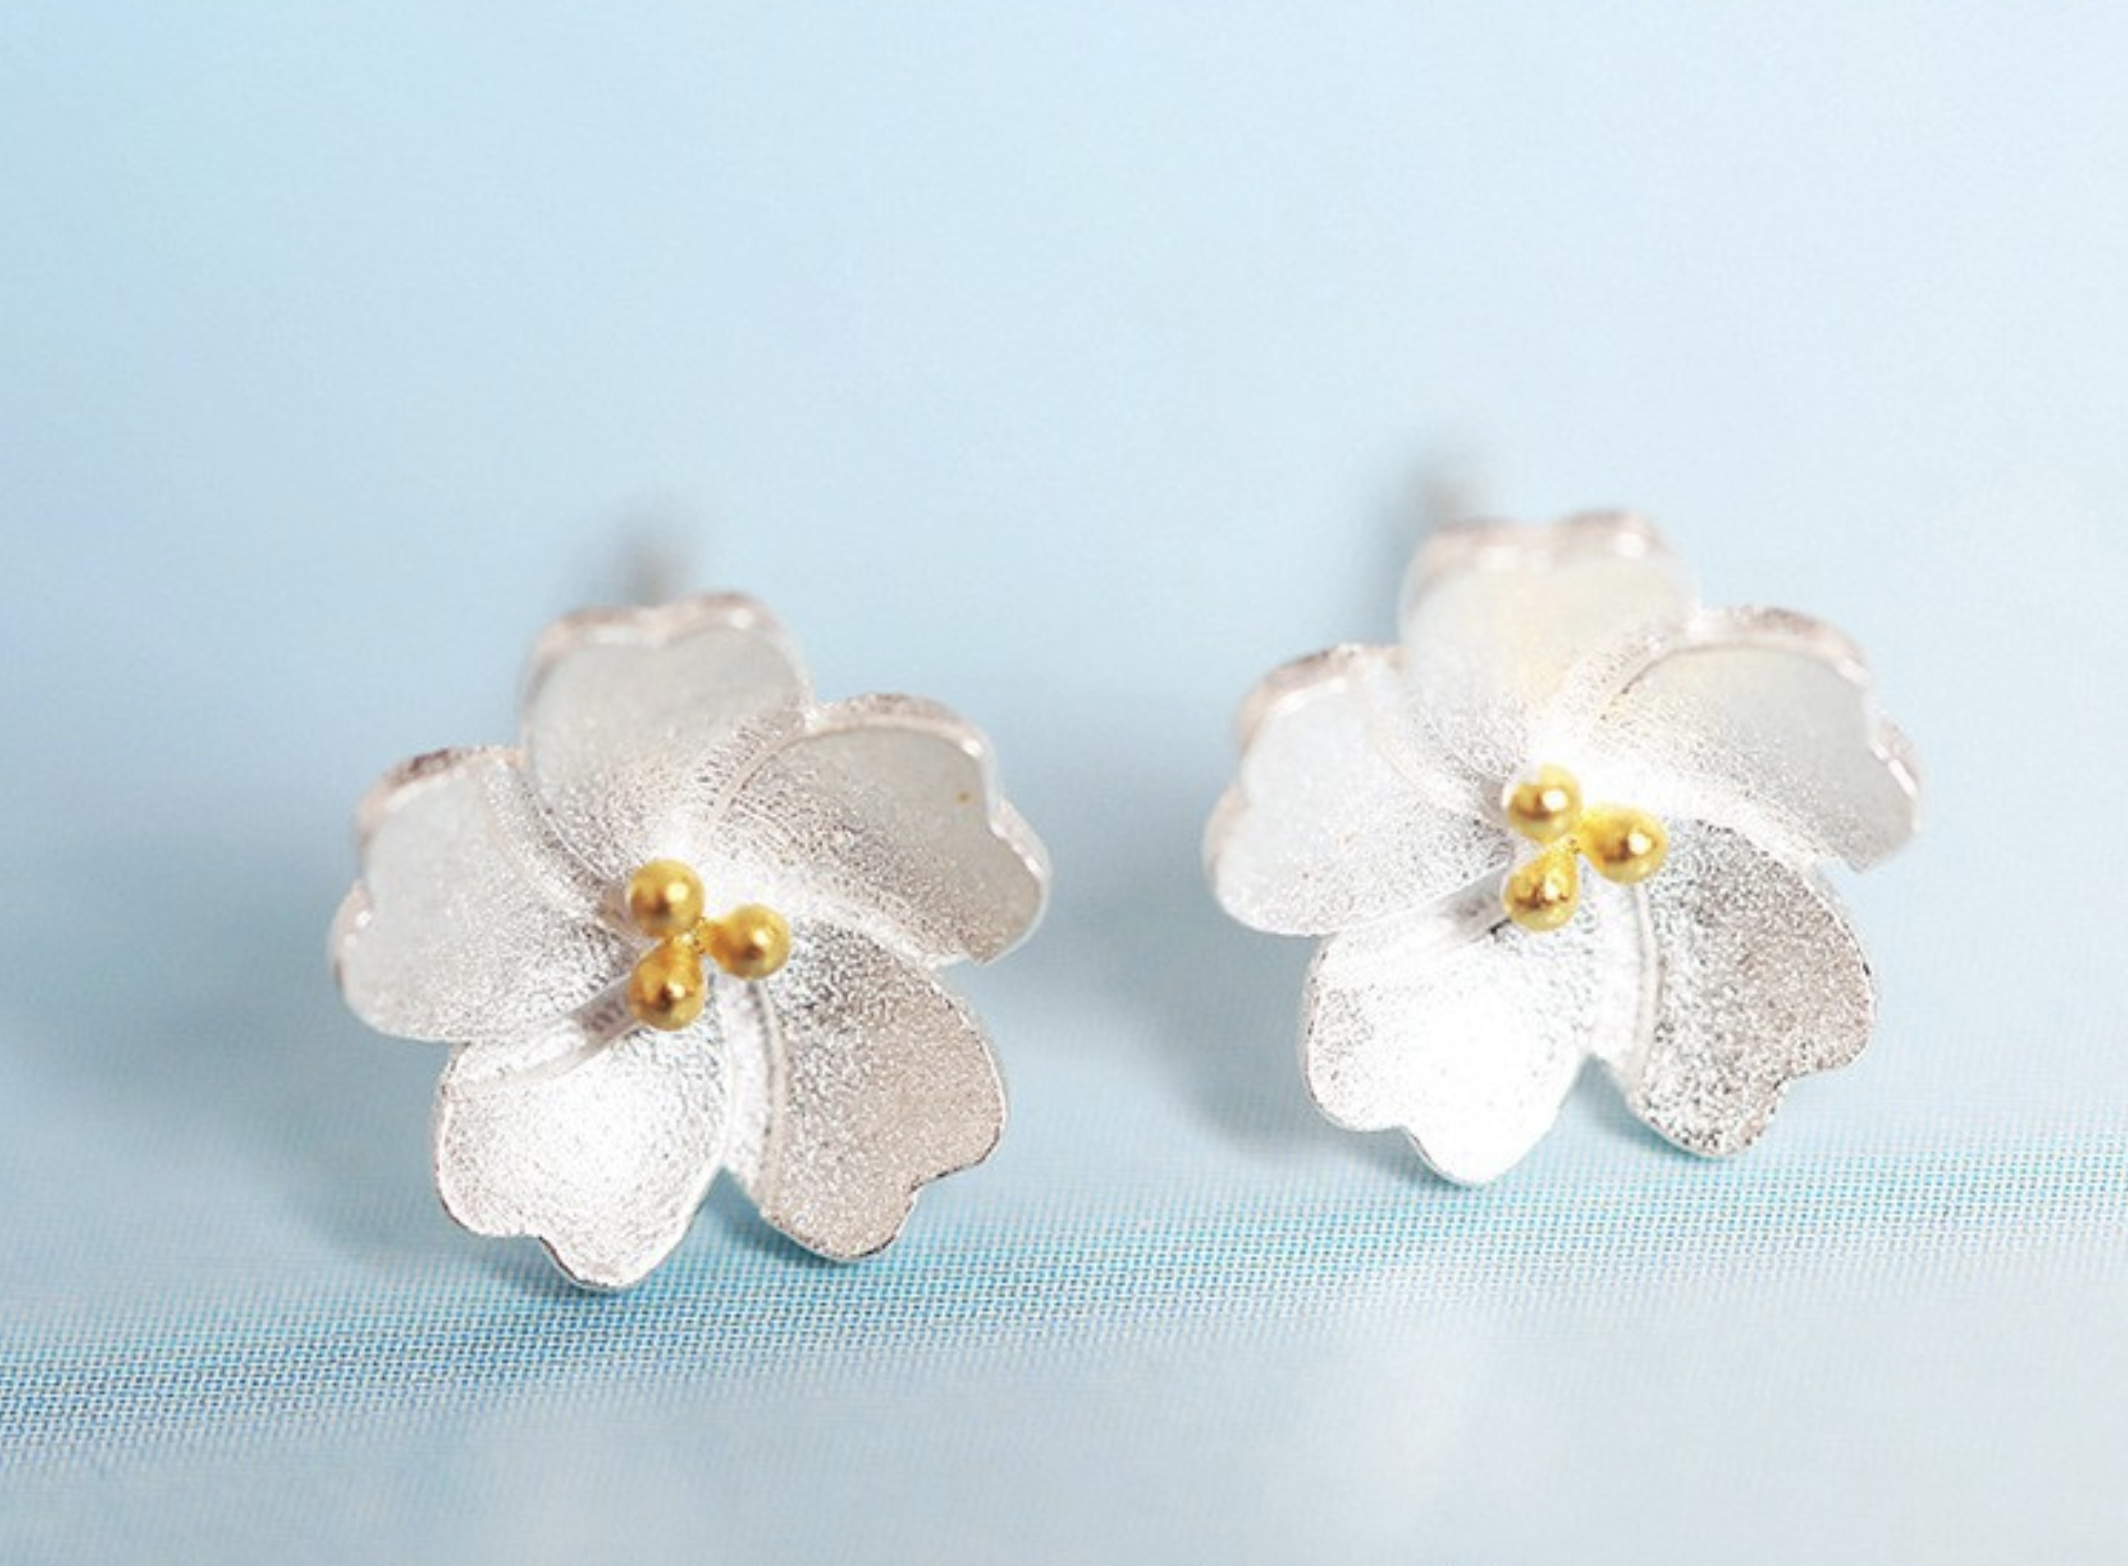 STERLING SILVER PANSY EARRINGS - Zoe Alice Jewellery and Gifts